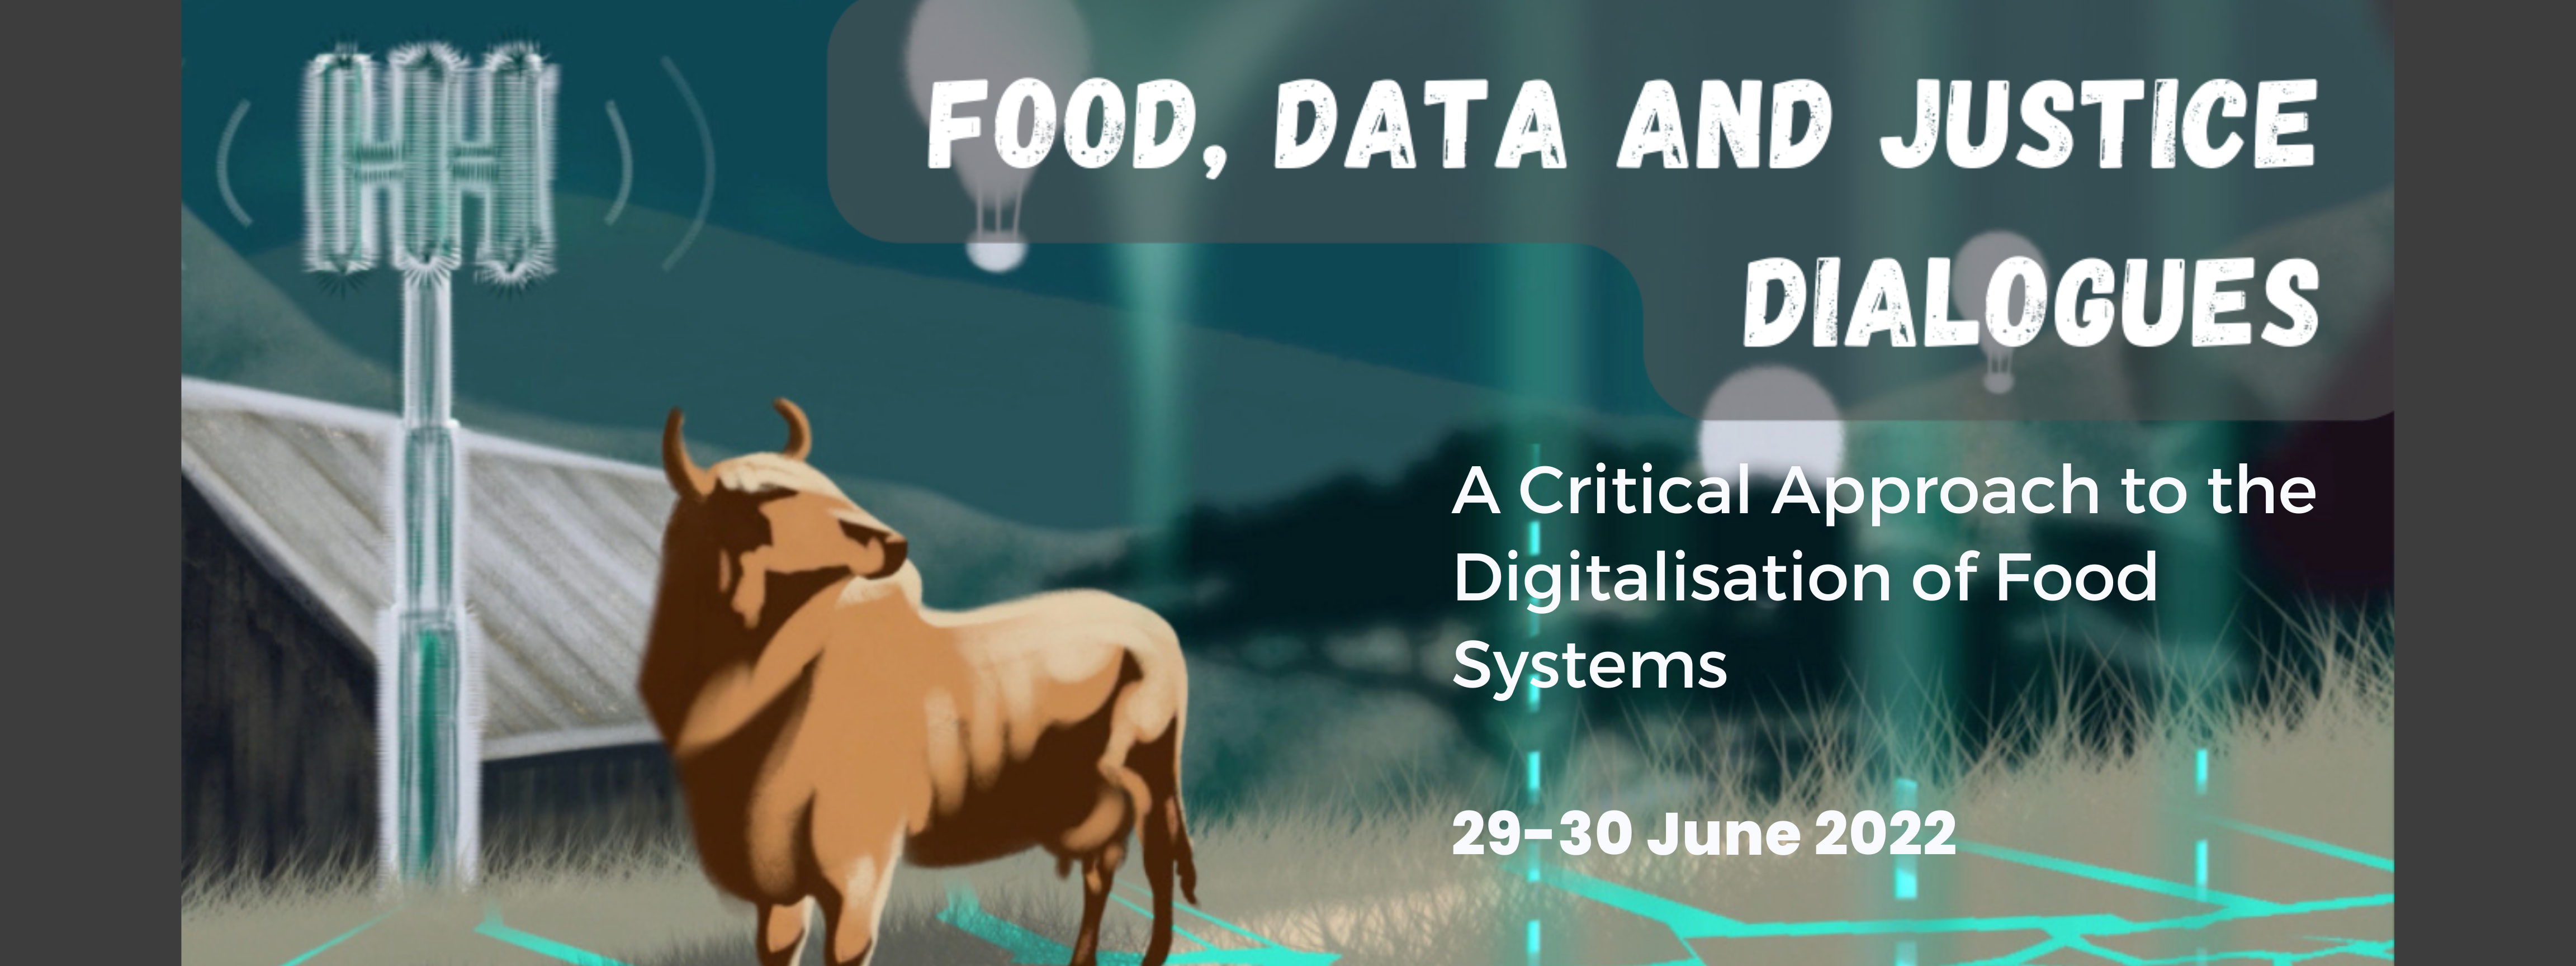 A Critical Approach to the Digitalisation of Food Systems